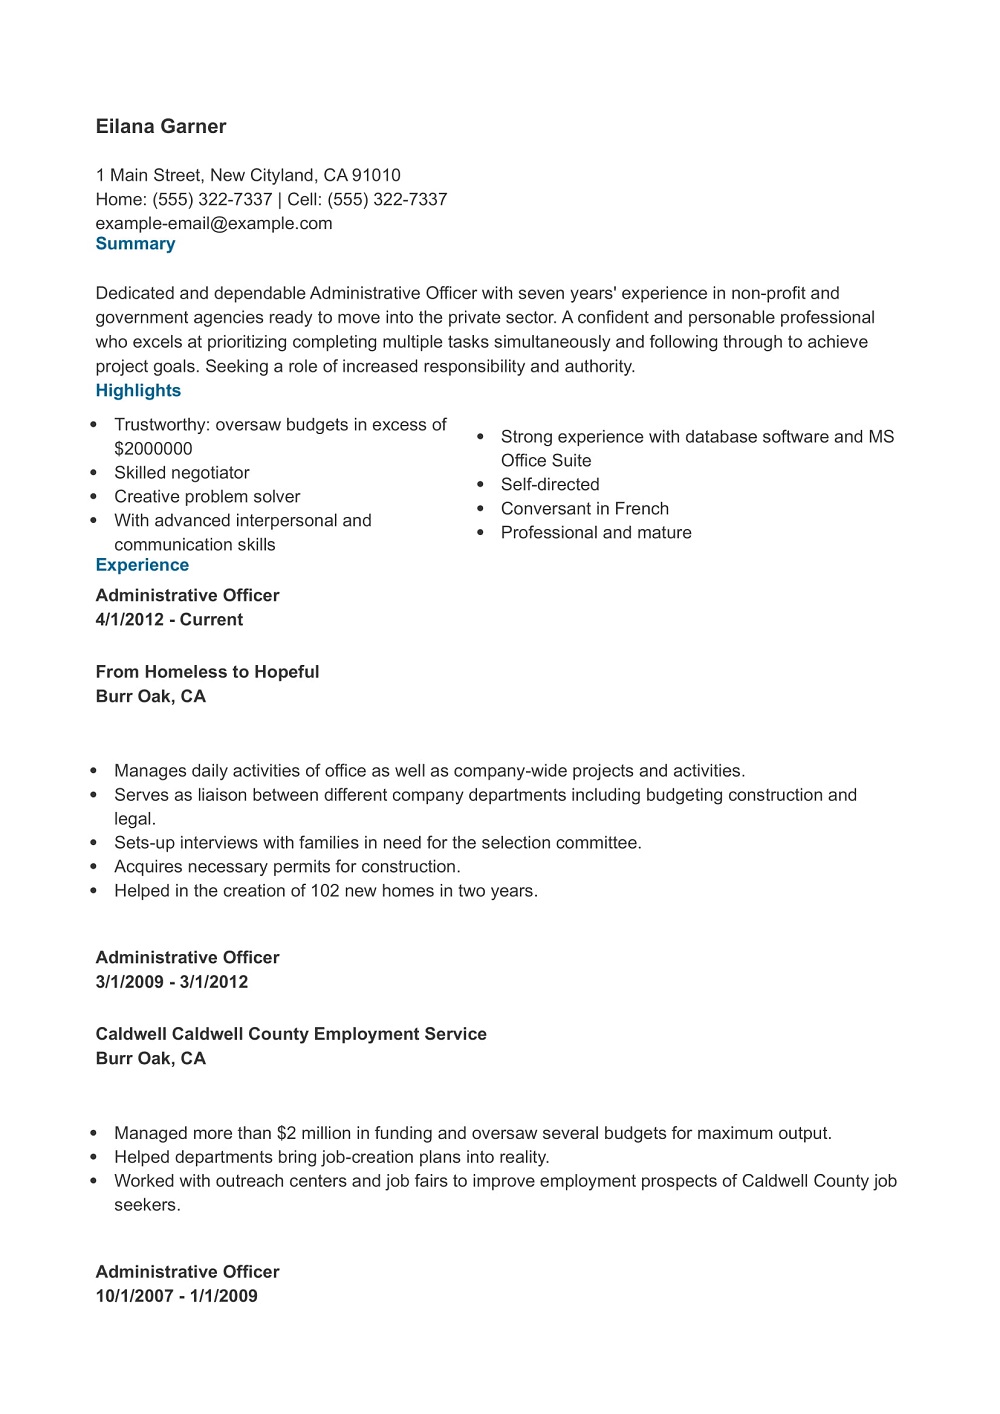 Administrative Officer Resume Template